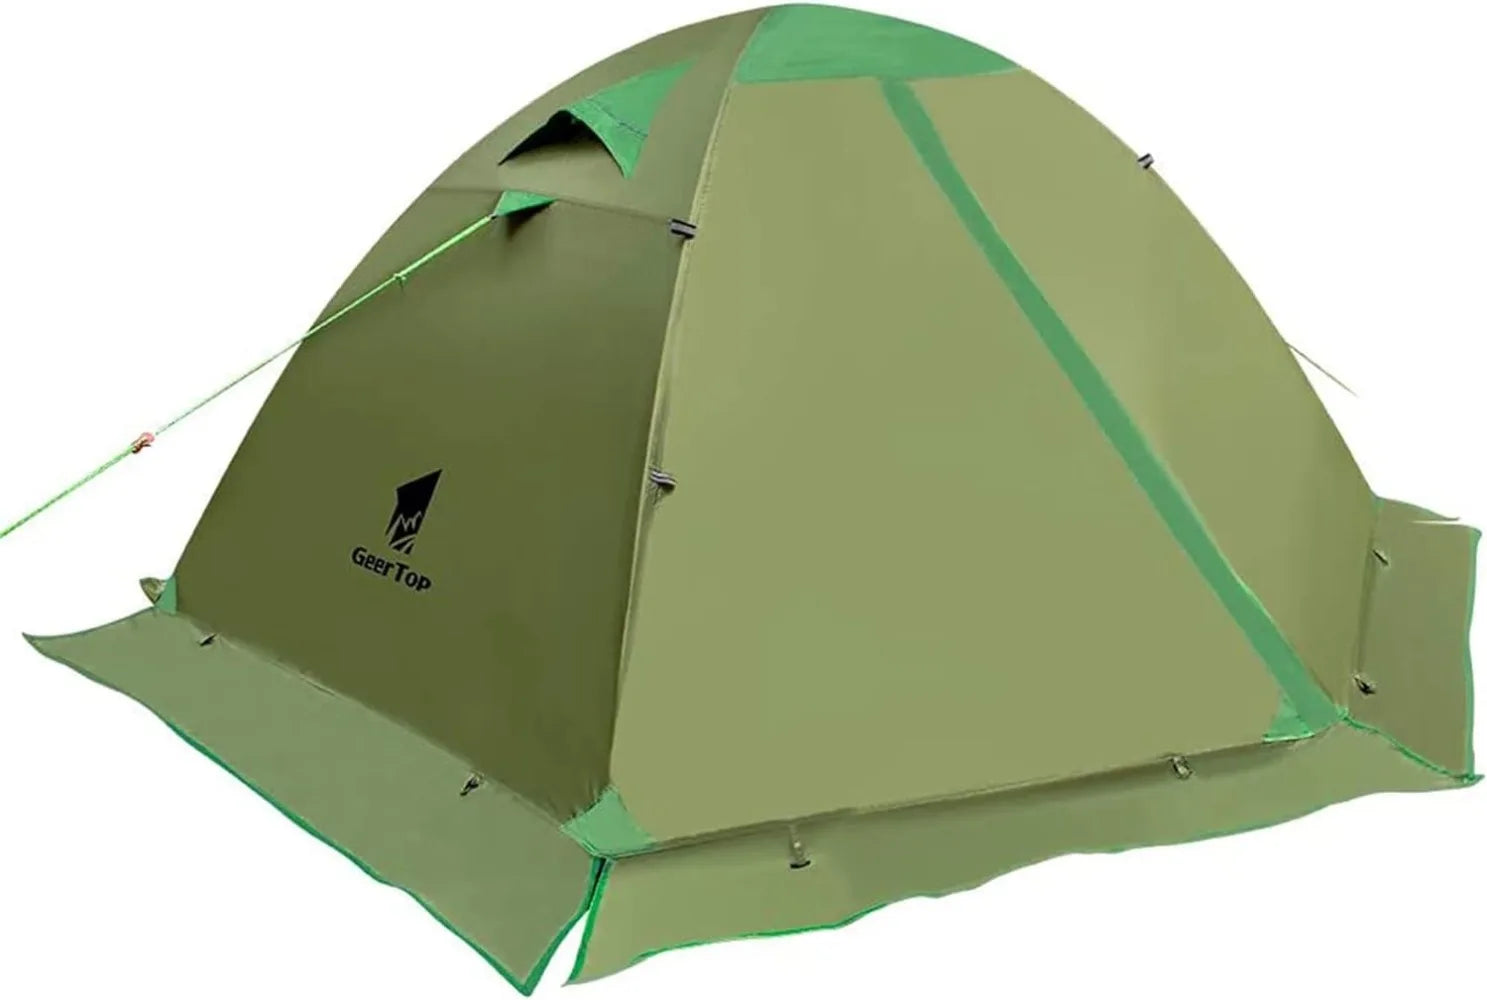  Ultralight 2 Person Backpacking Tent 1